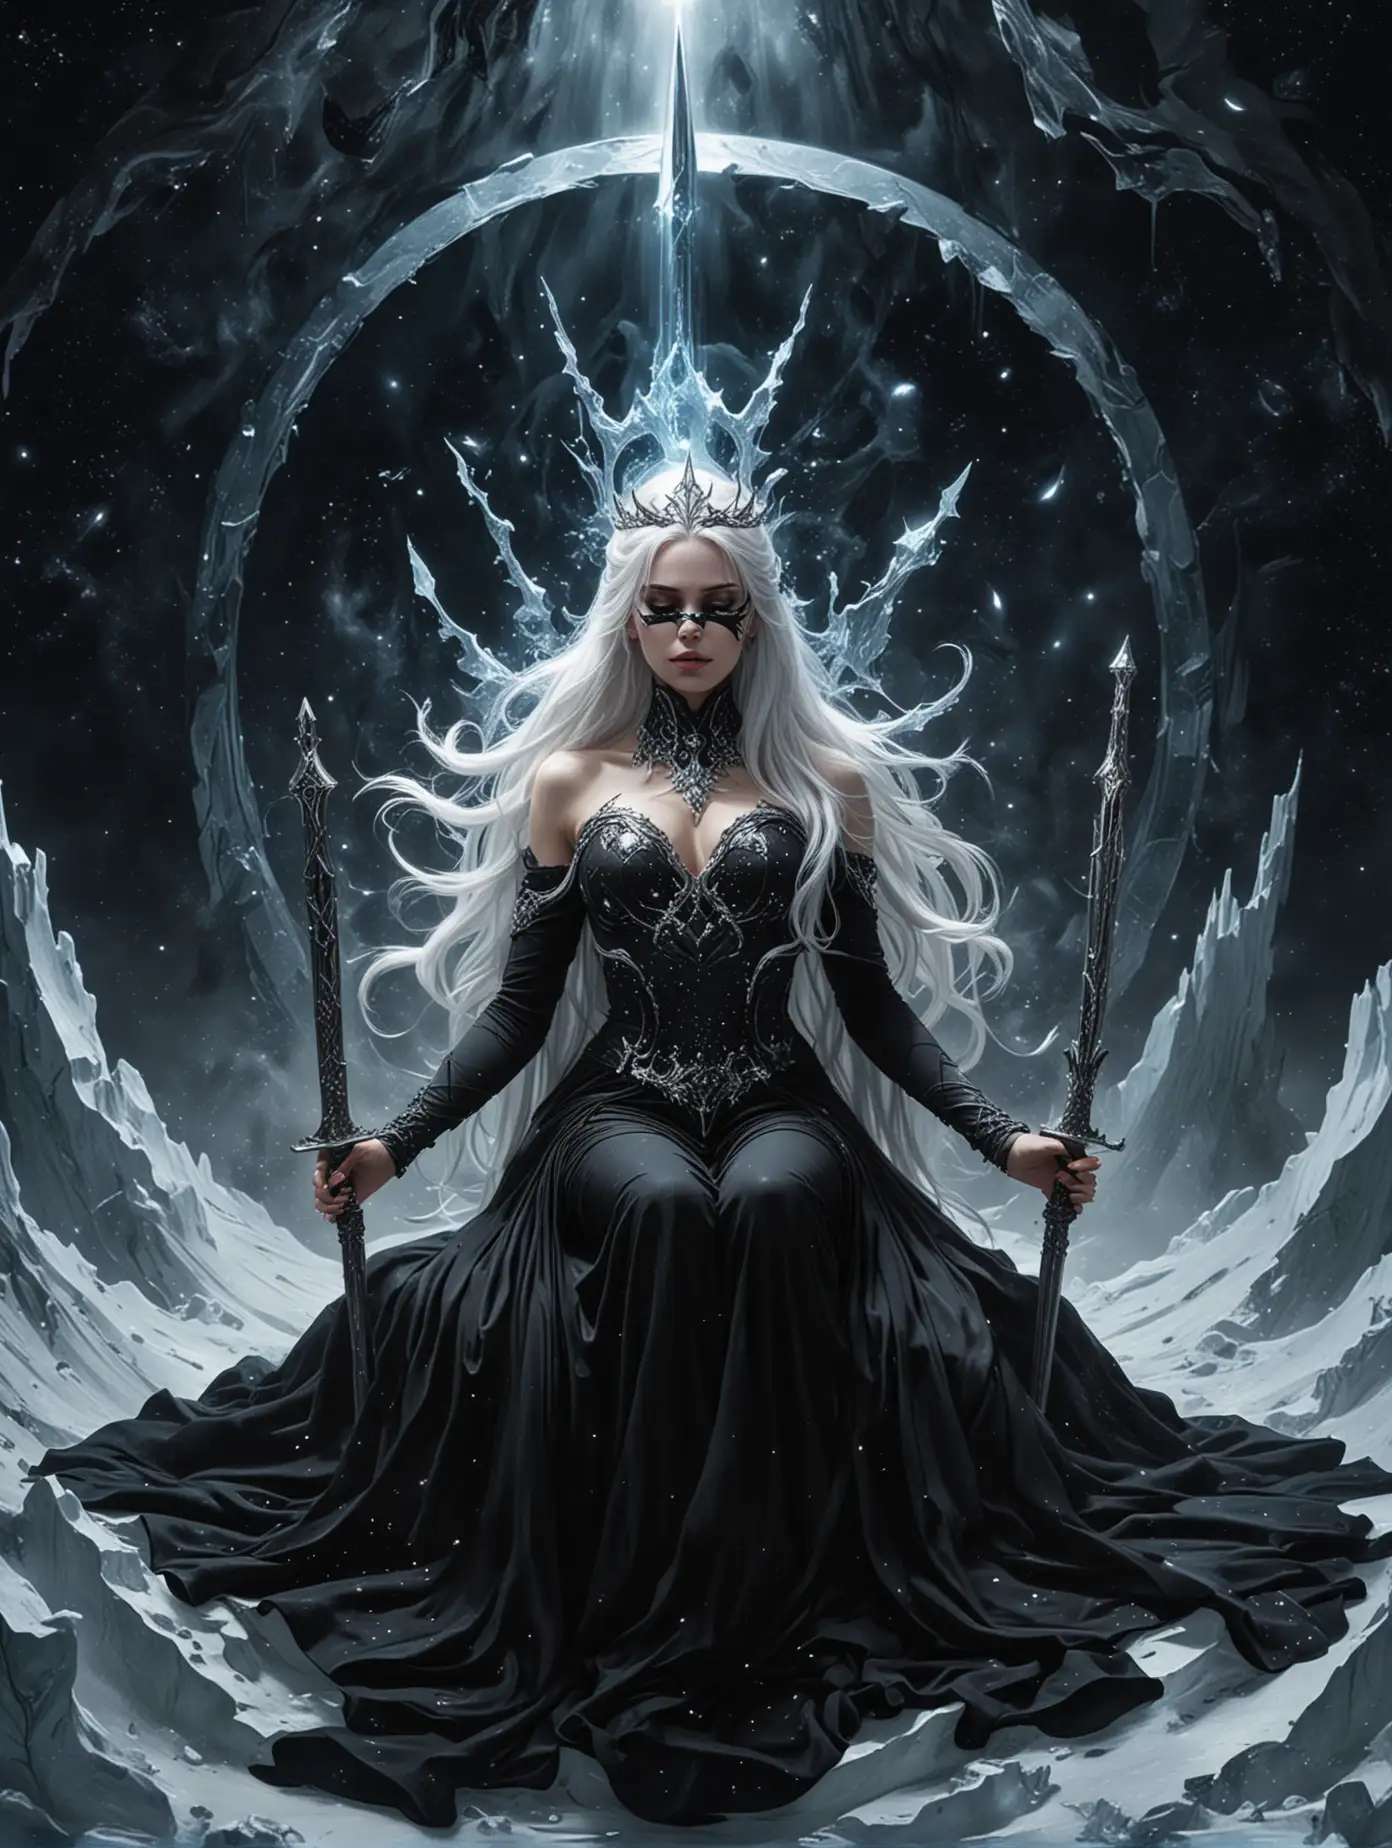 Goddess-on-Ice-Throne-in-Space-with-Black-Hole-Backdrop